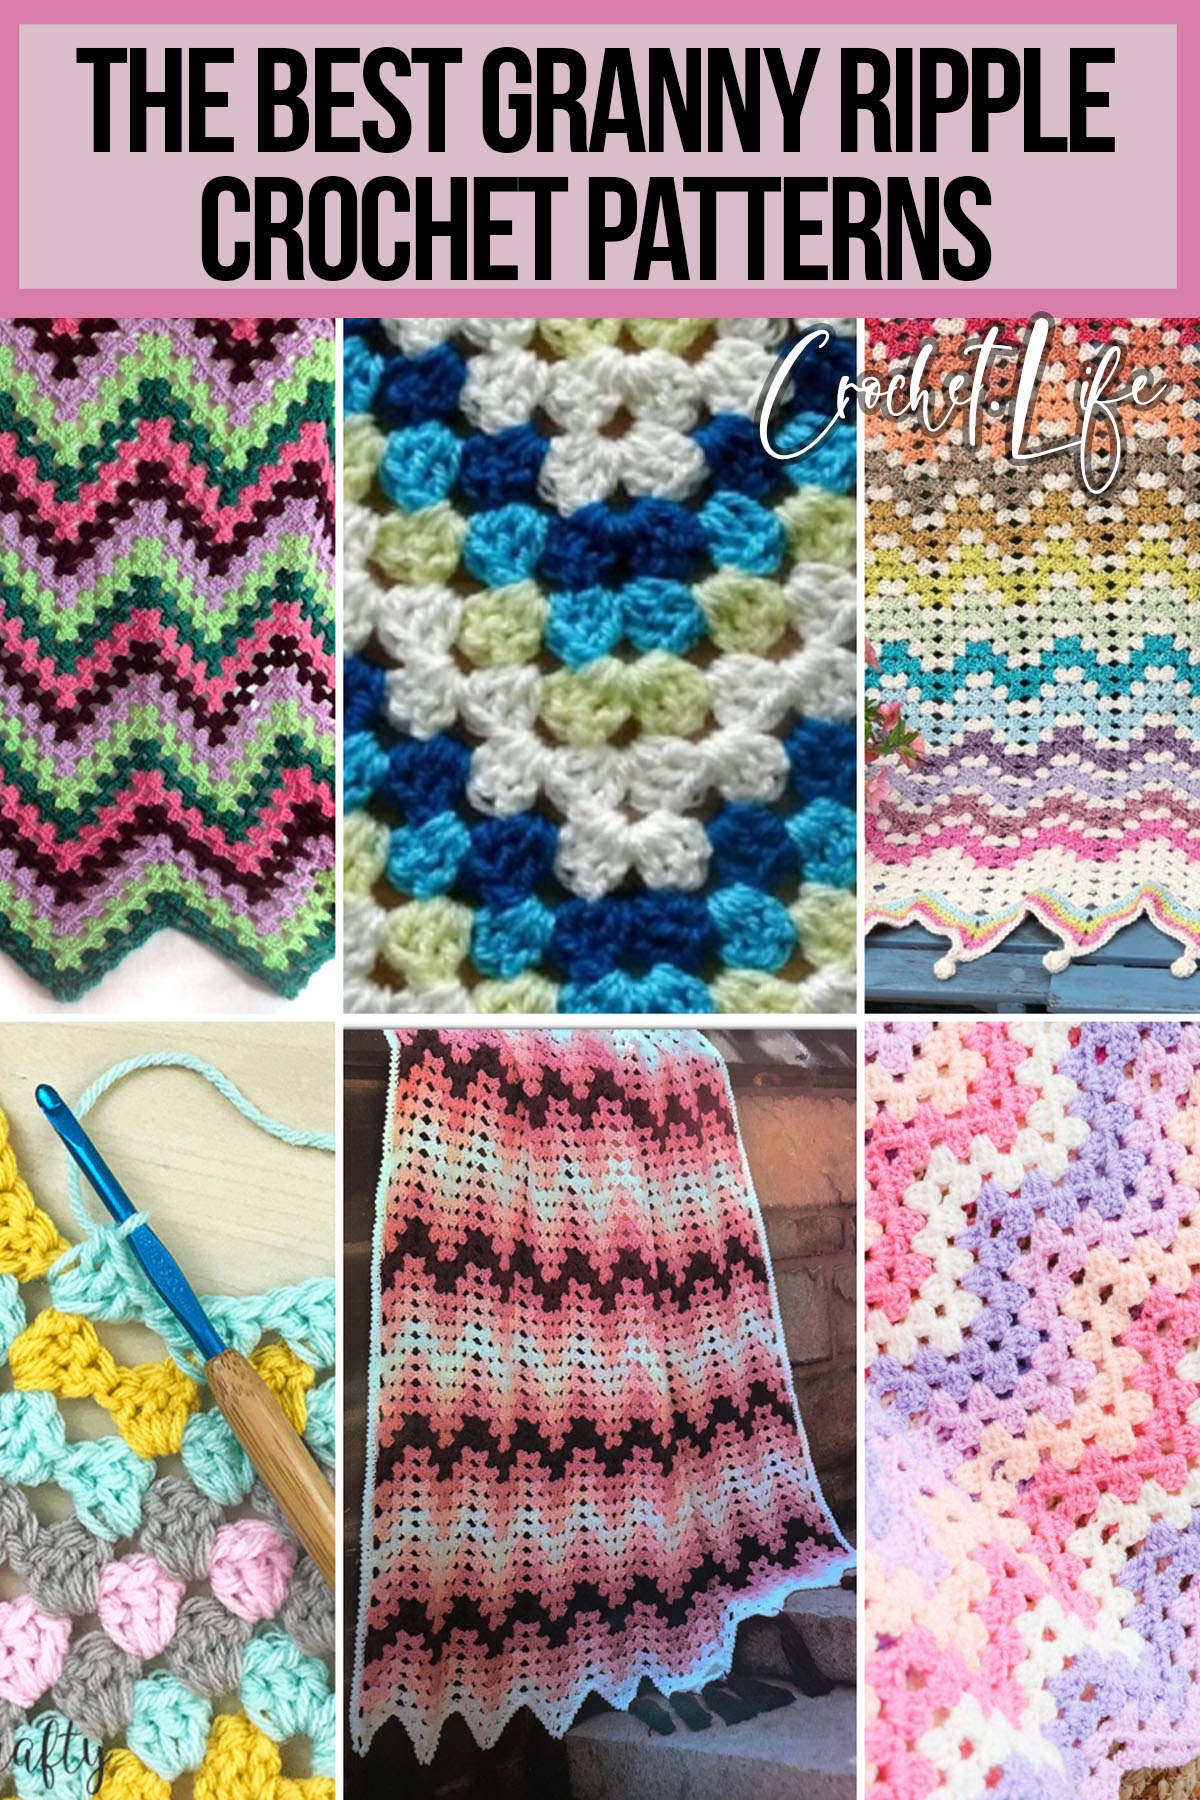 photo collage of patterns for crocheted granny ripple projects with text which reads the best granny ripple crochet patterns